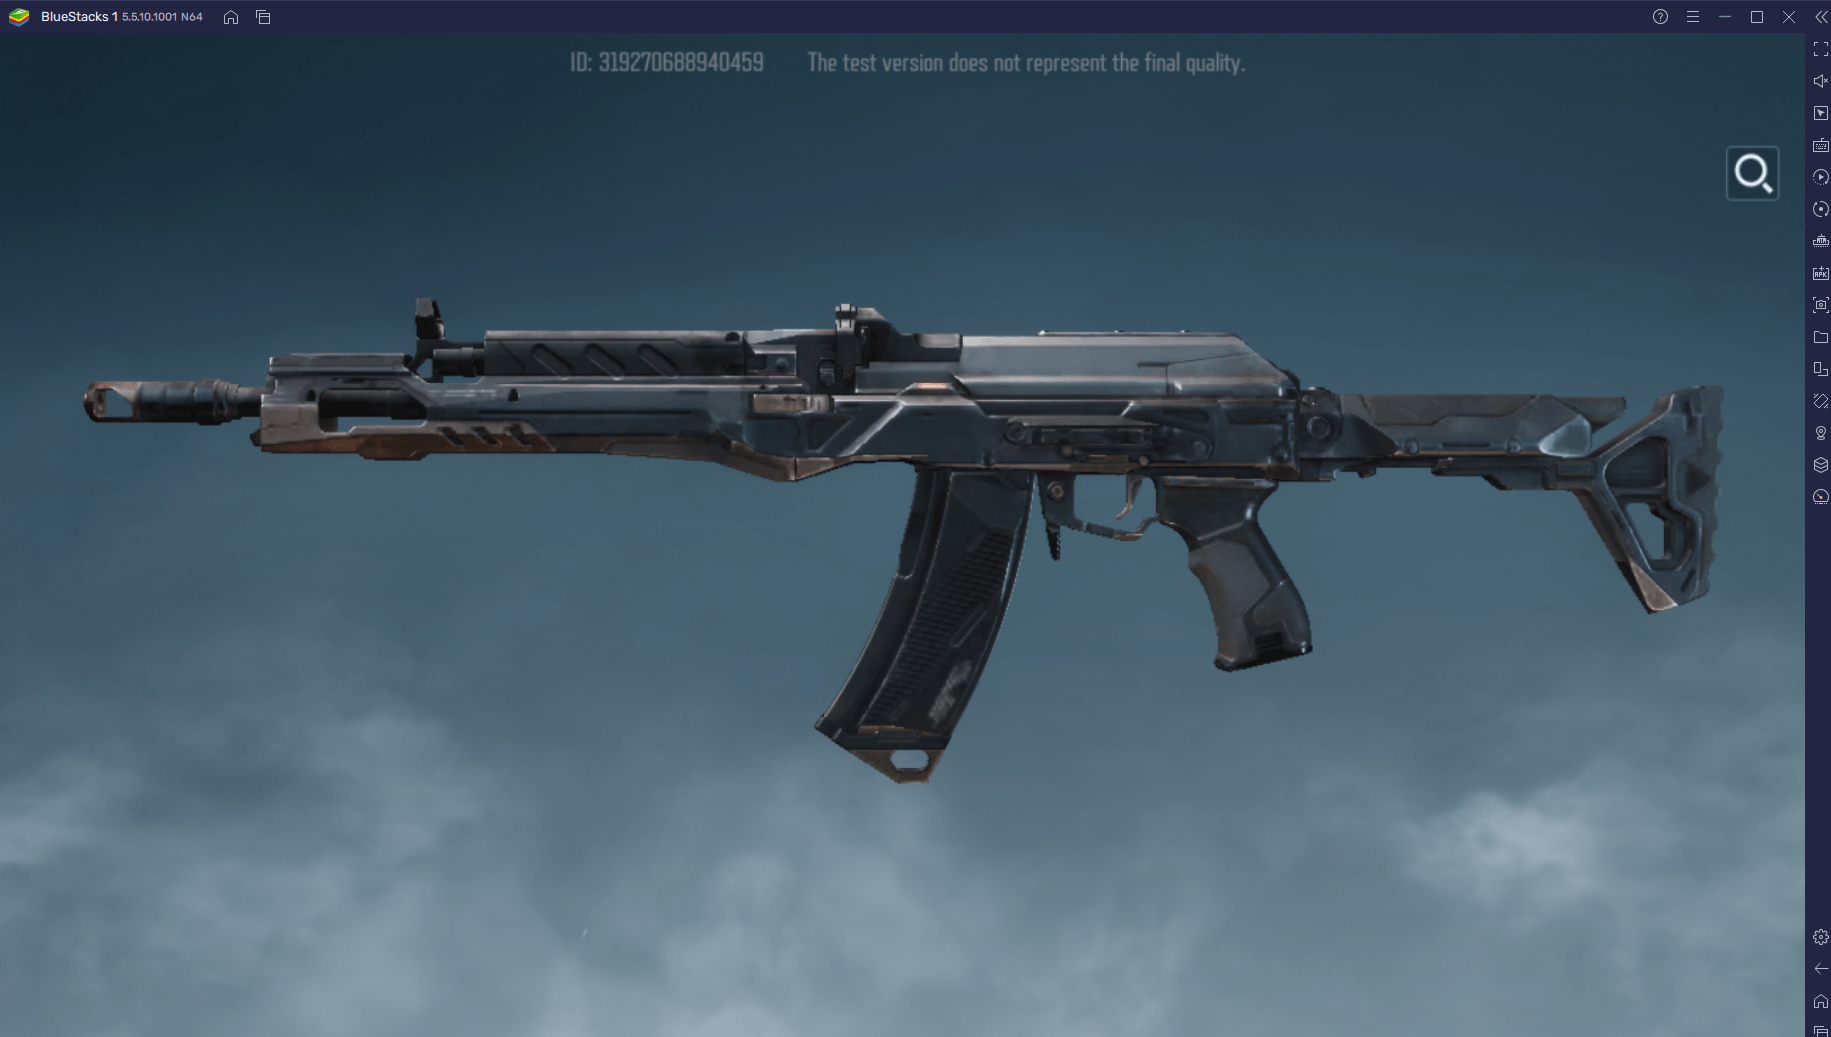 Learn all about Hyper Front Assault Rifles and choose the weapon that best suits your playstyle